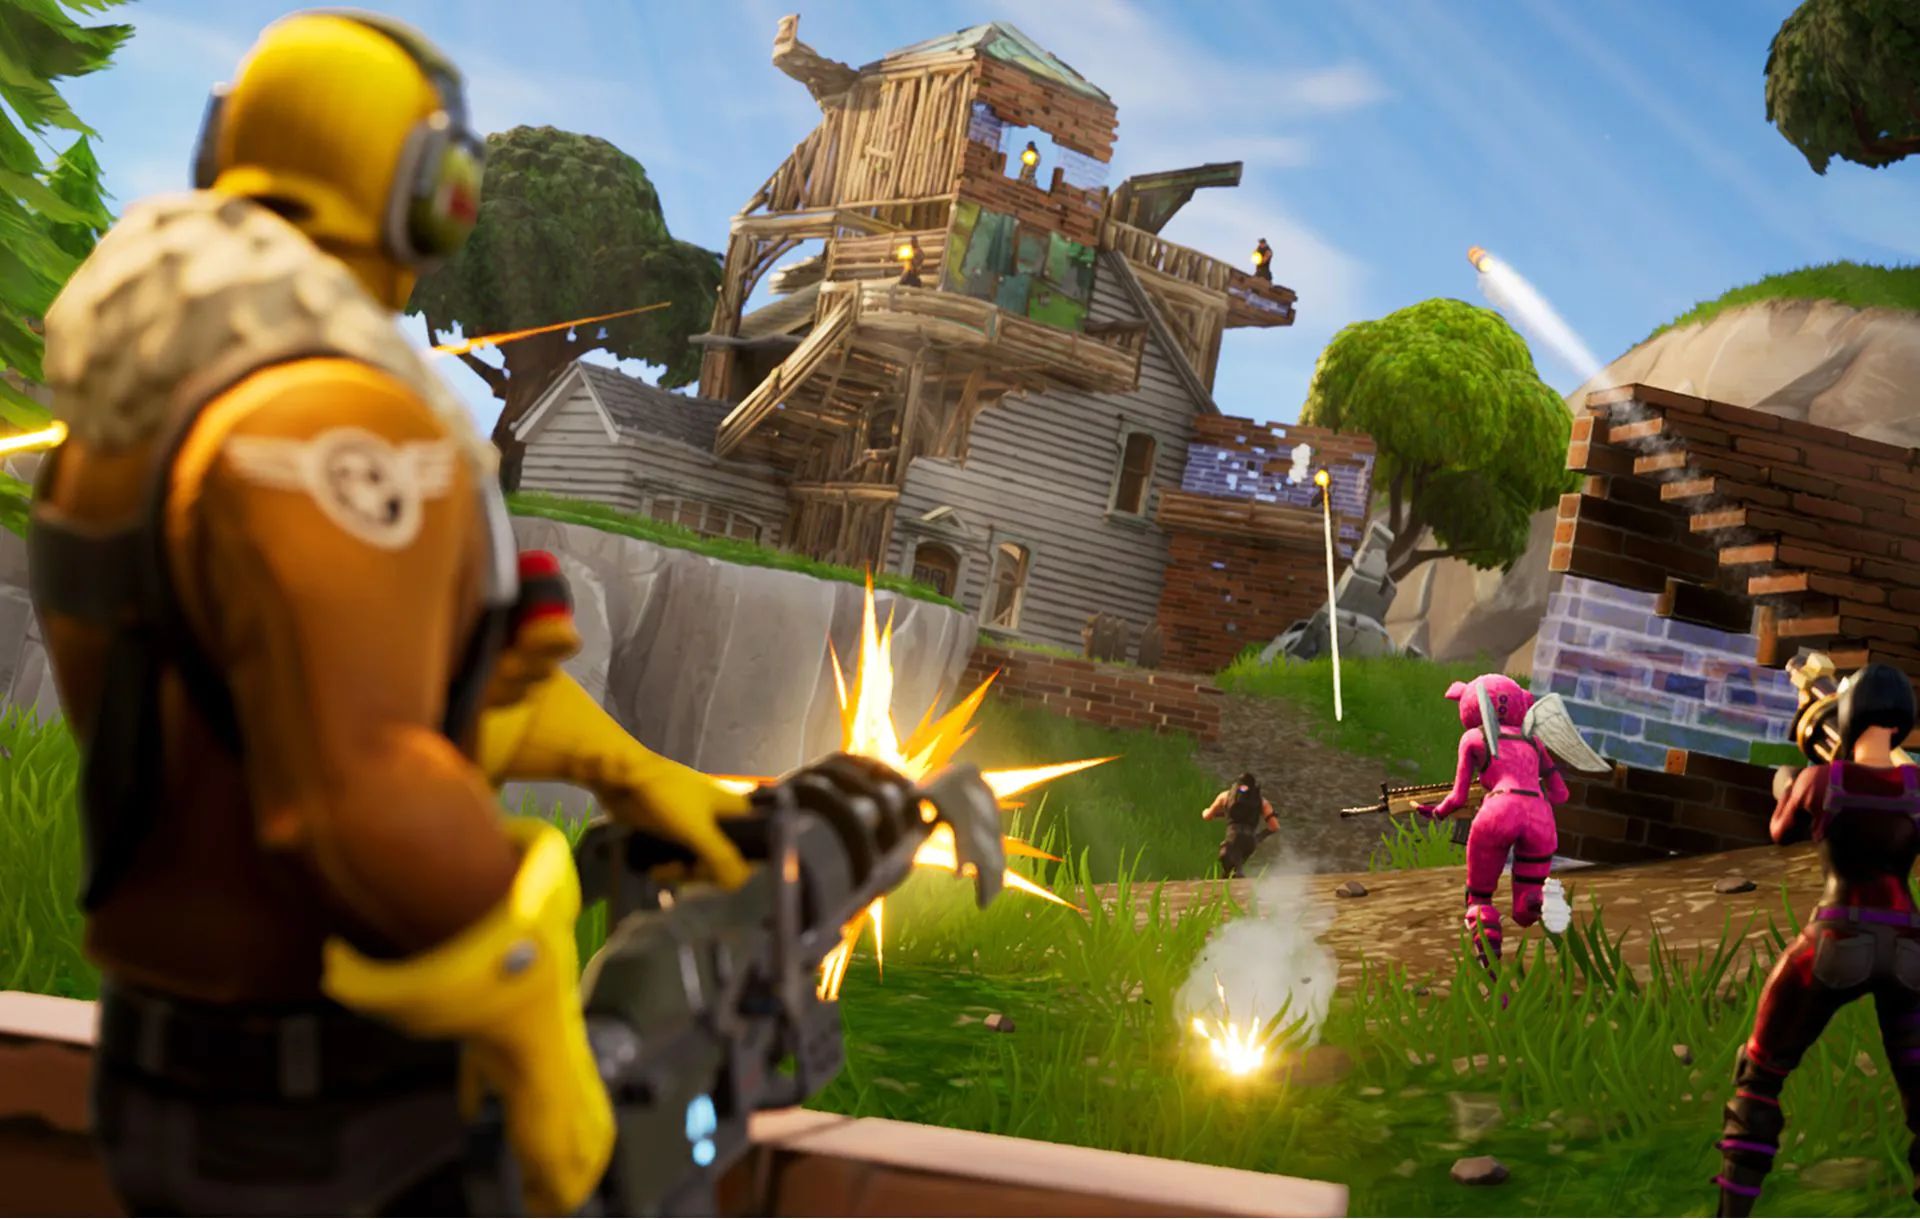 In this article, we are going to be going over the Fortnite error code ls-0016 fix, so you can enjoy the popular battle royale game without problems.